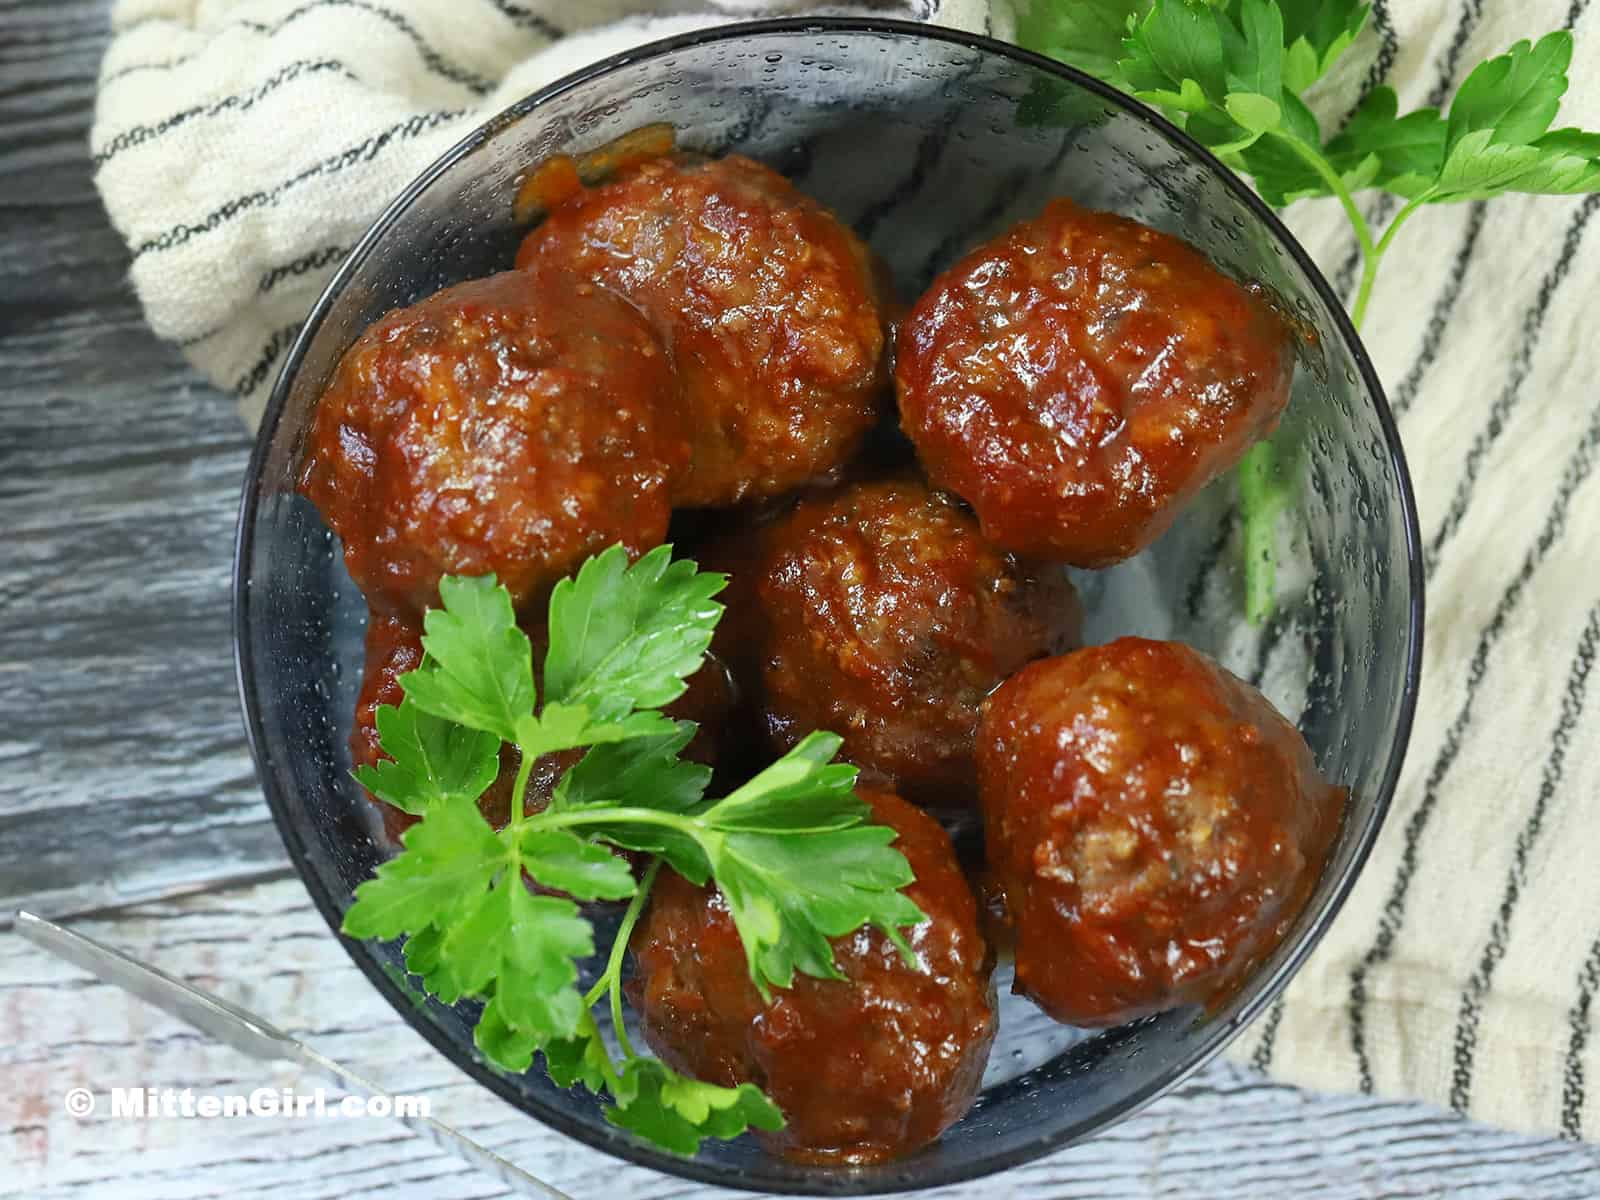 BBQ Meatballs in a bowl, garnished with parsley.